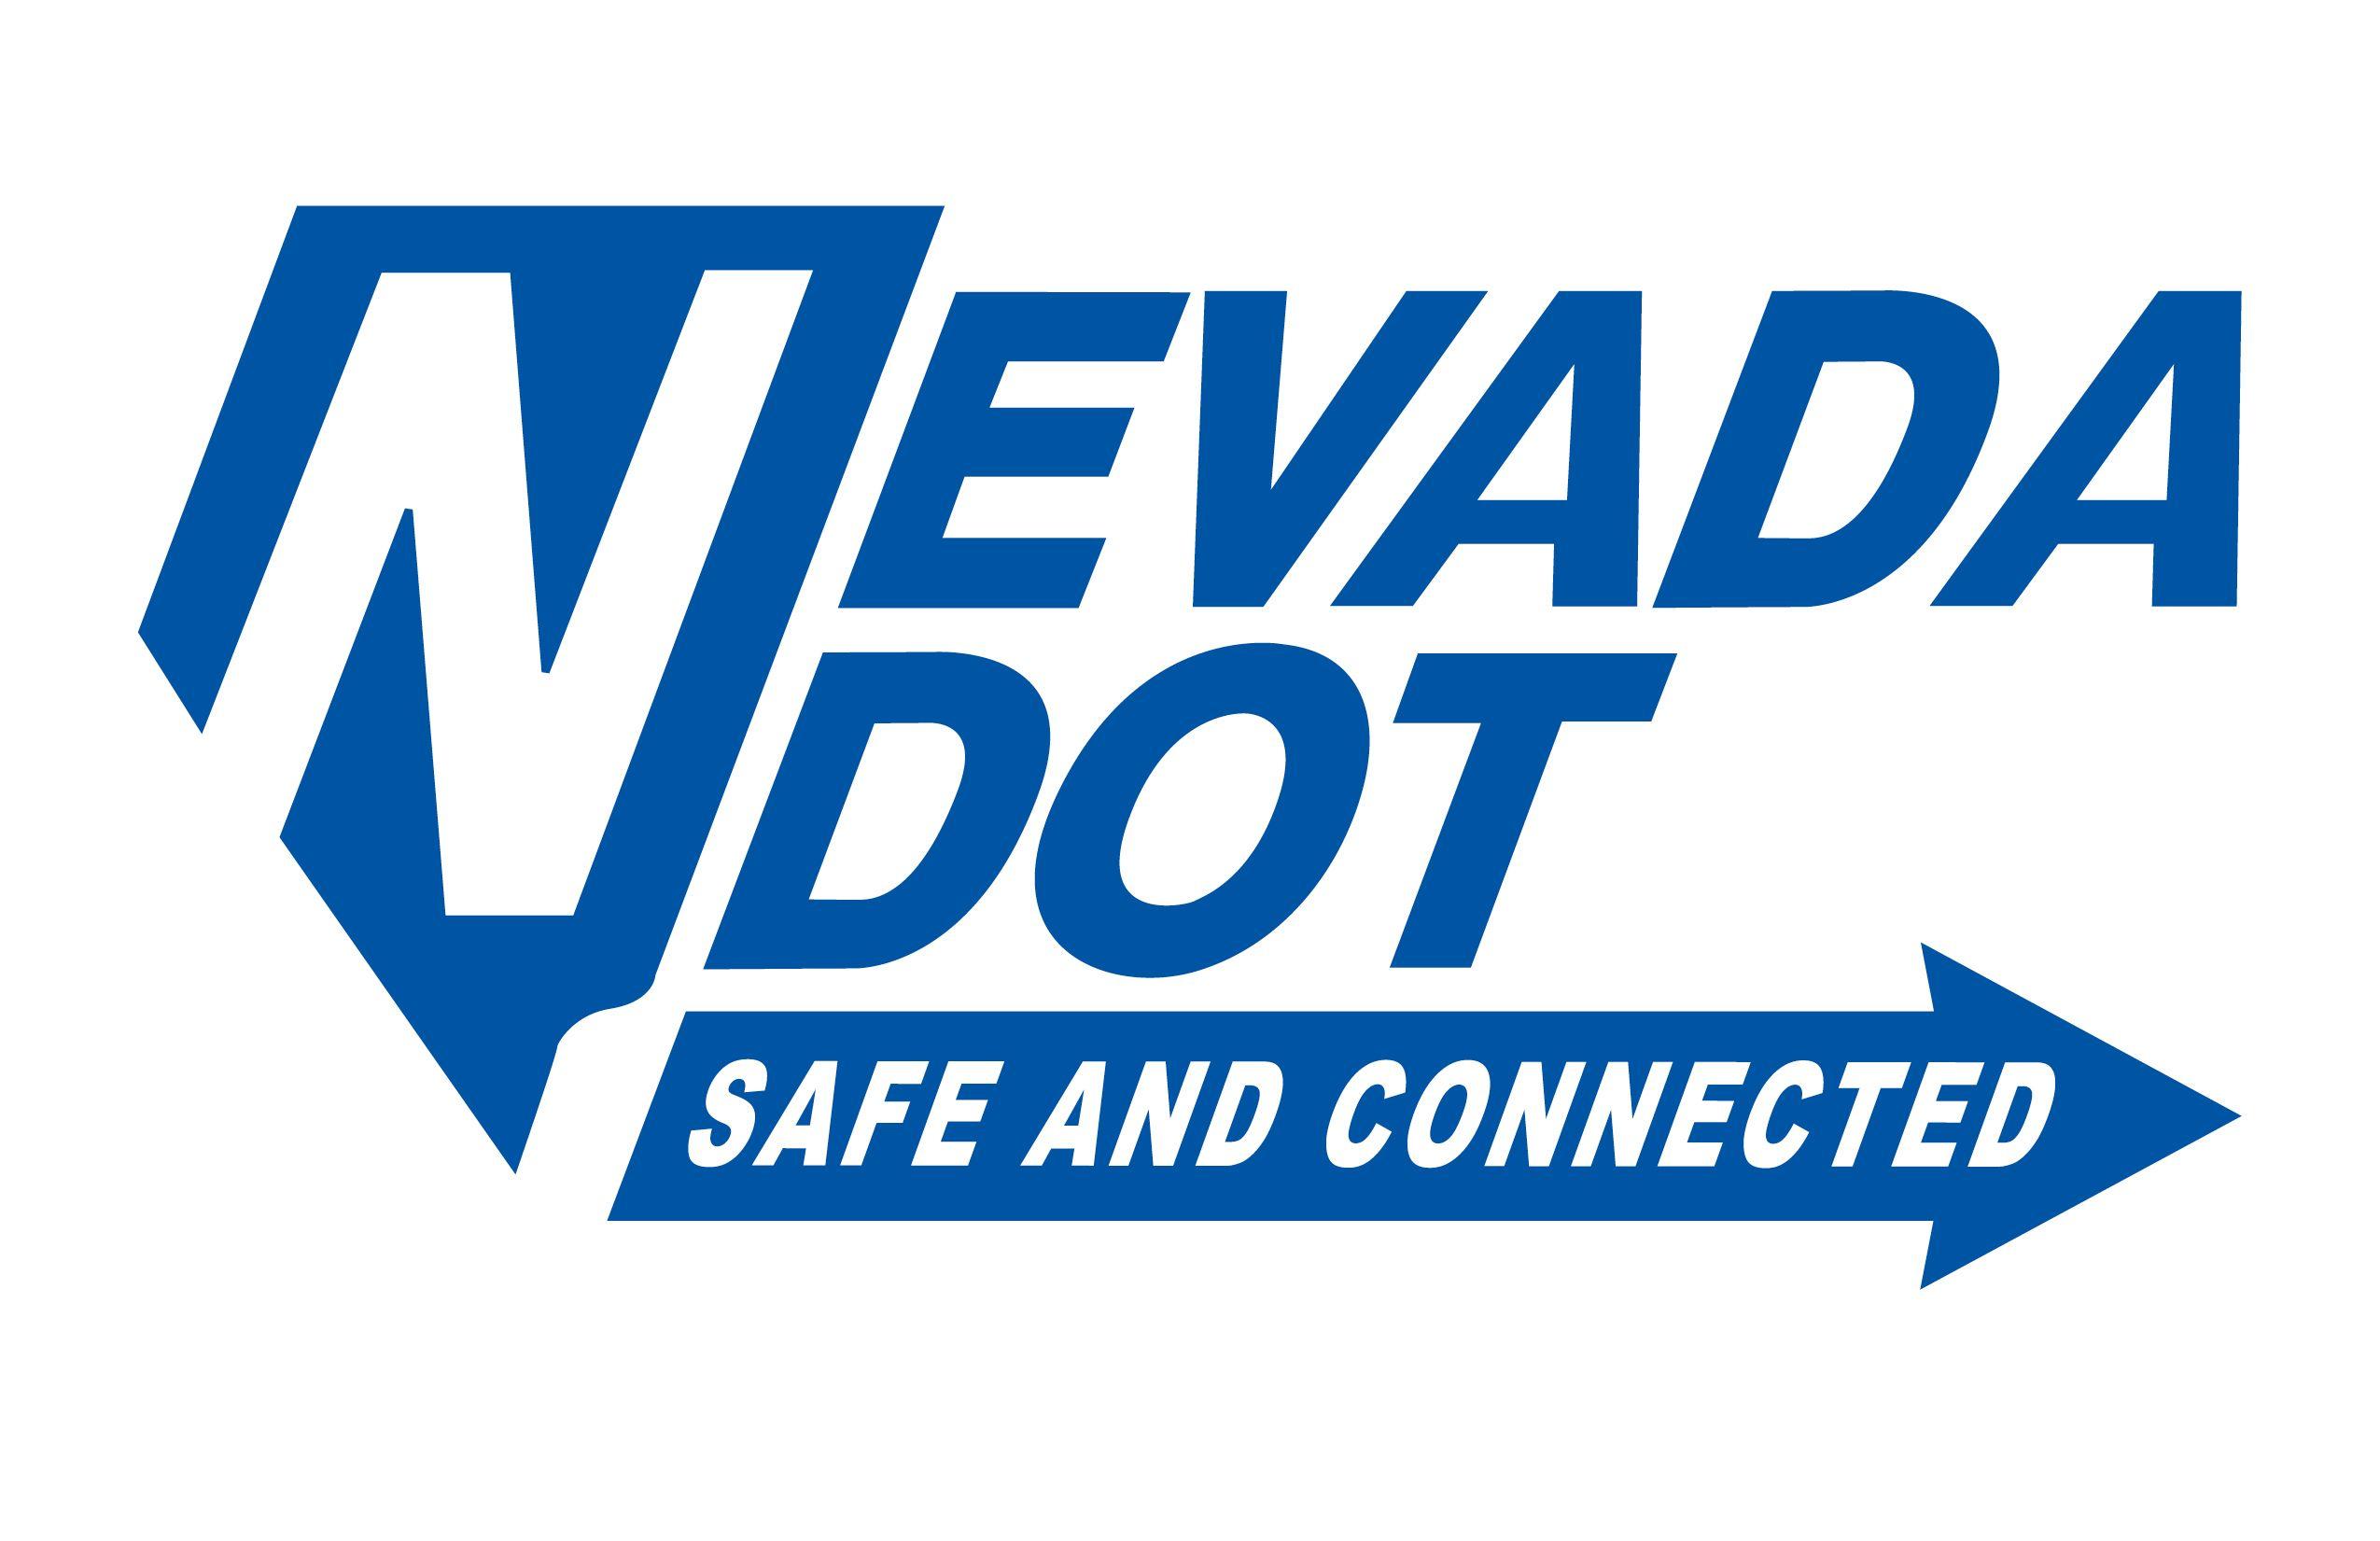 Nevada Logo - Nevada Department of Transportation Launches New Brand and Logo ...